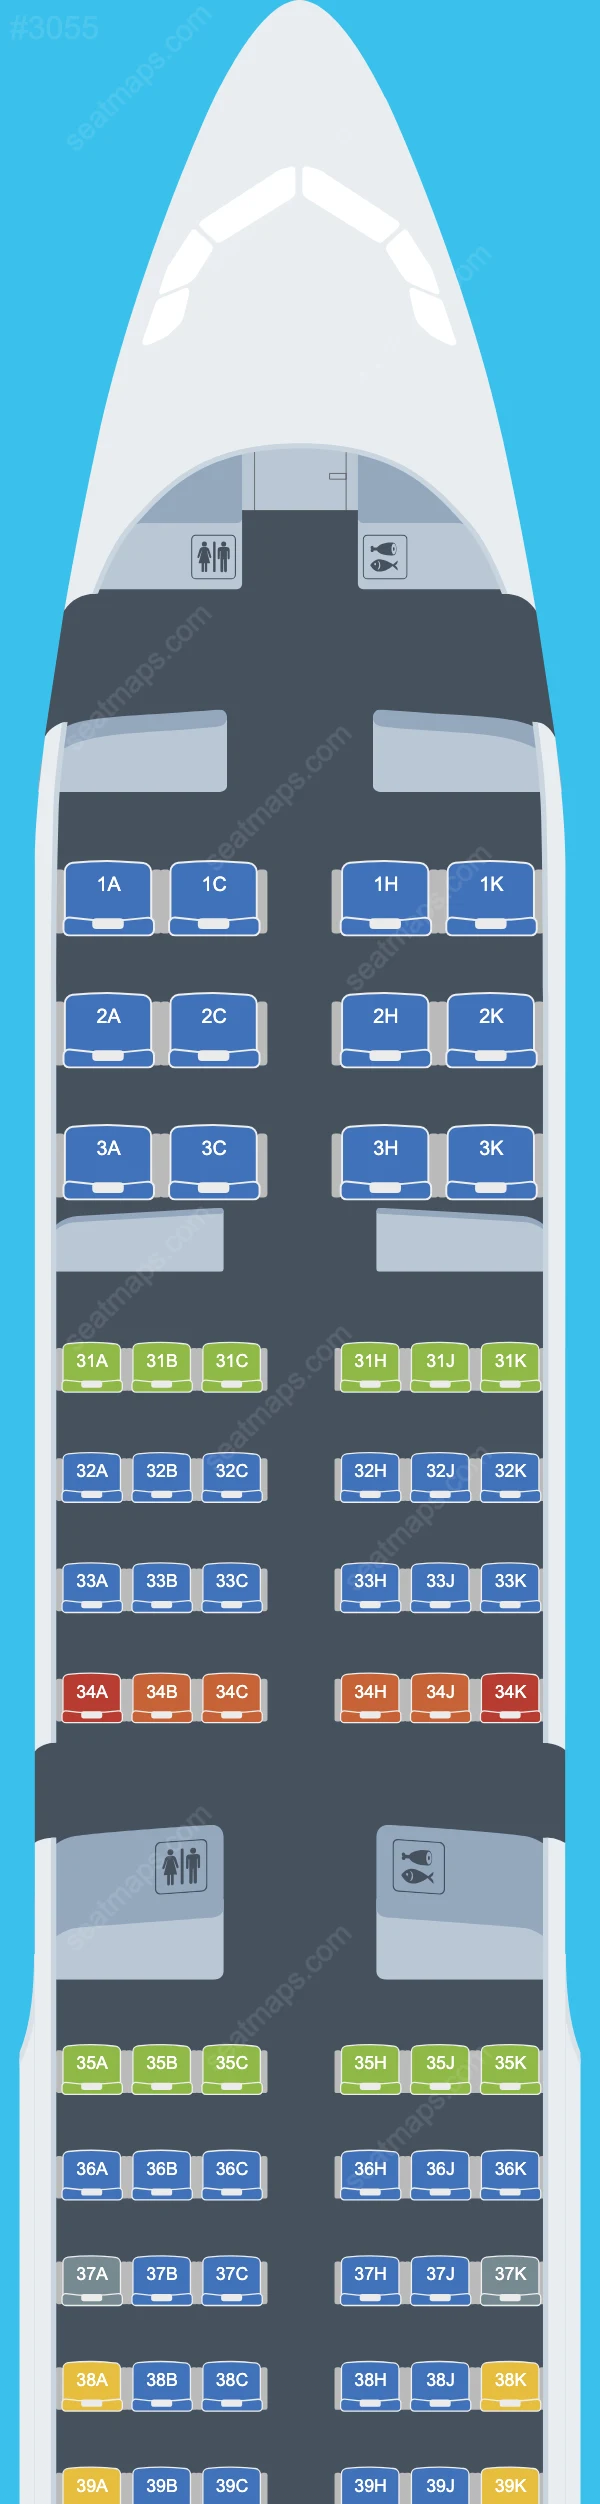 China Southern Airbus A321 Seat Maps A321-200 V.5